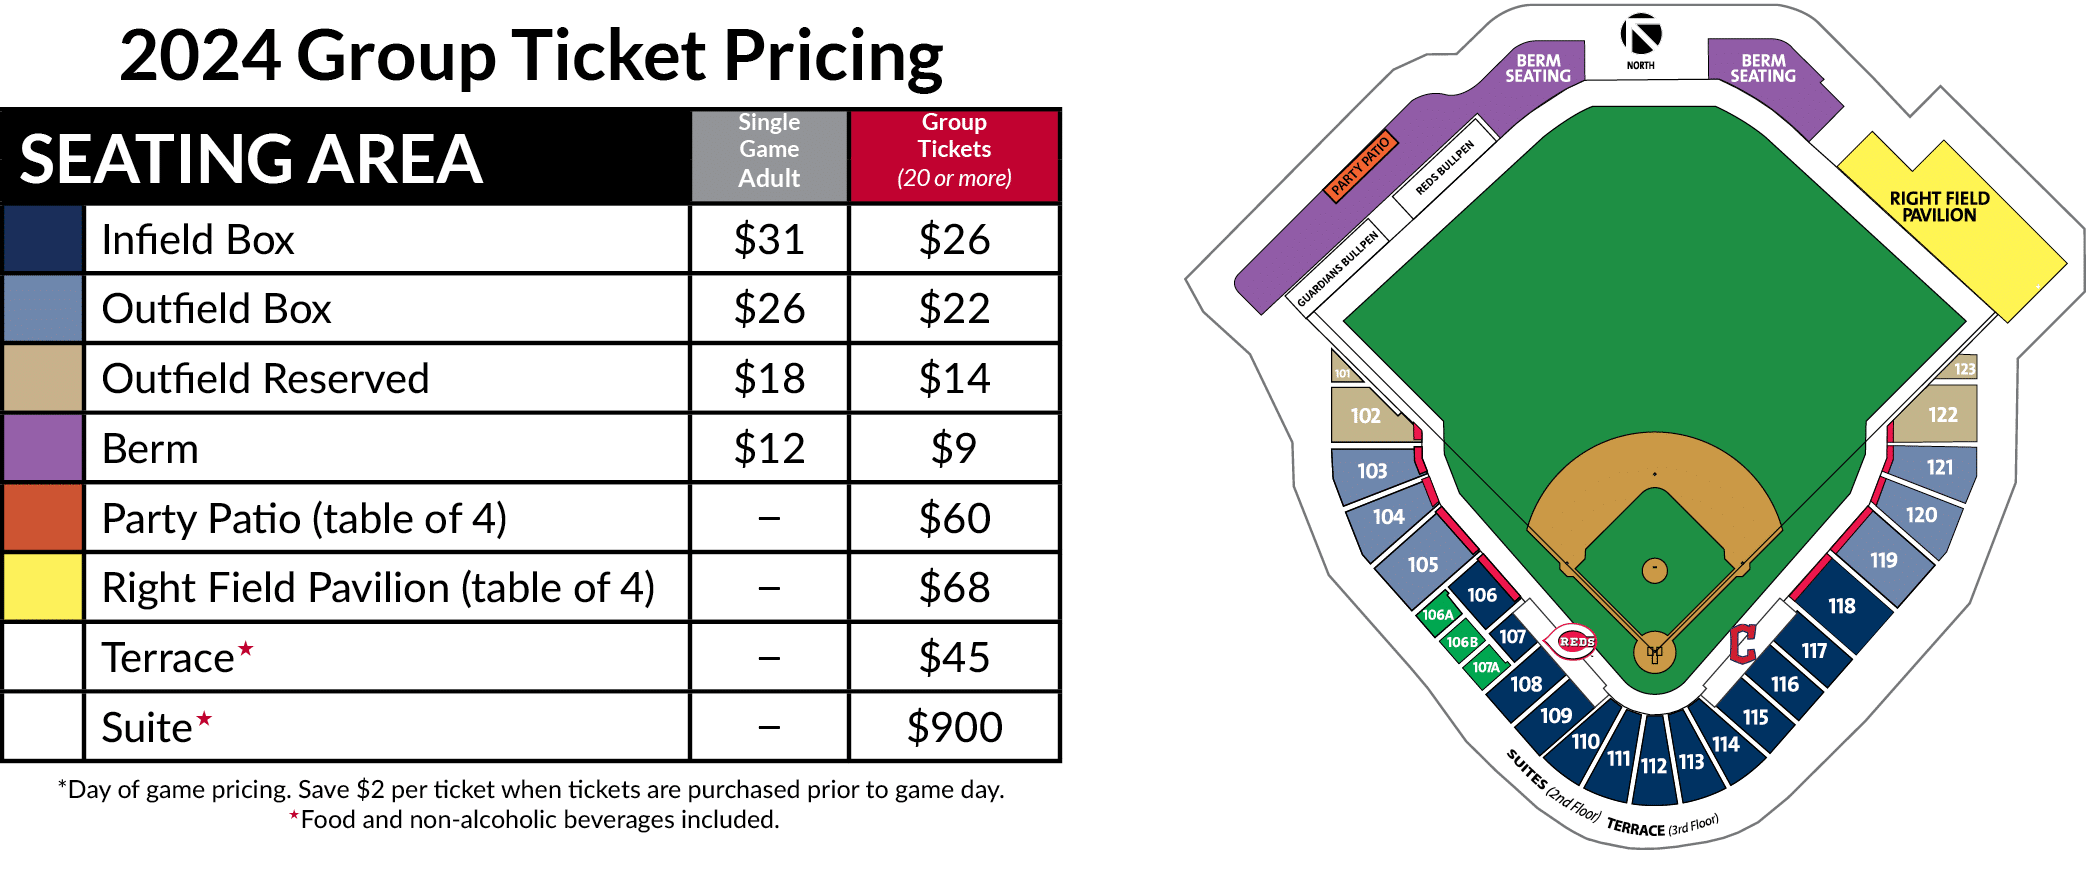 2024 spring training group ticket pricing